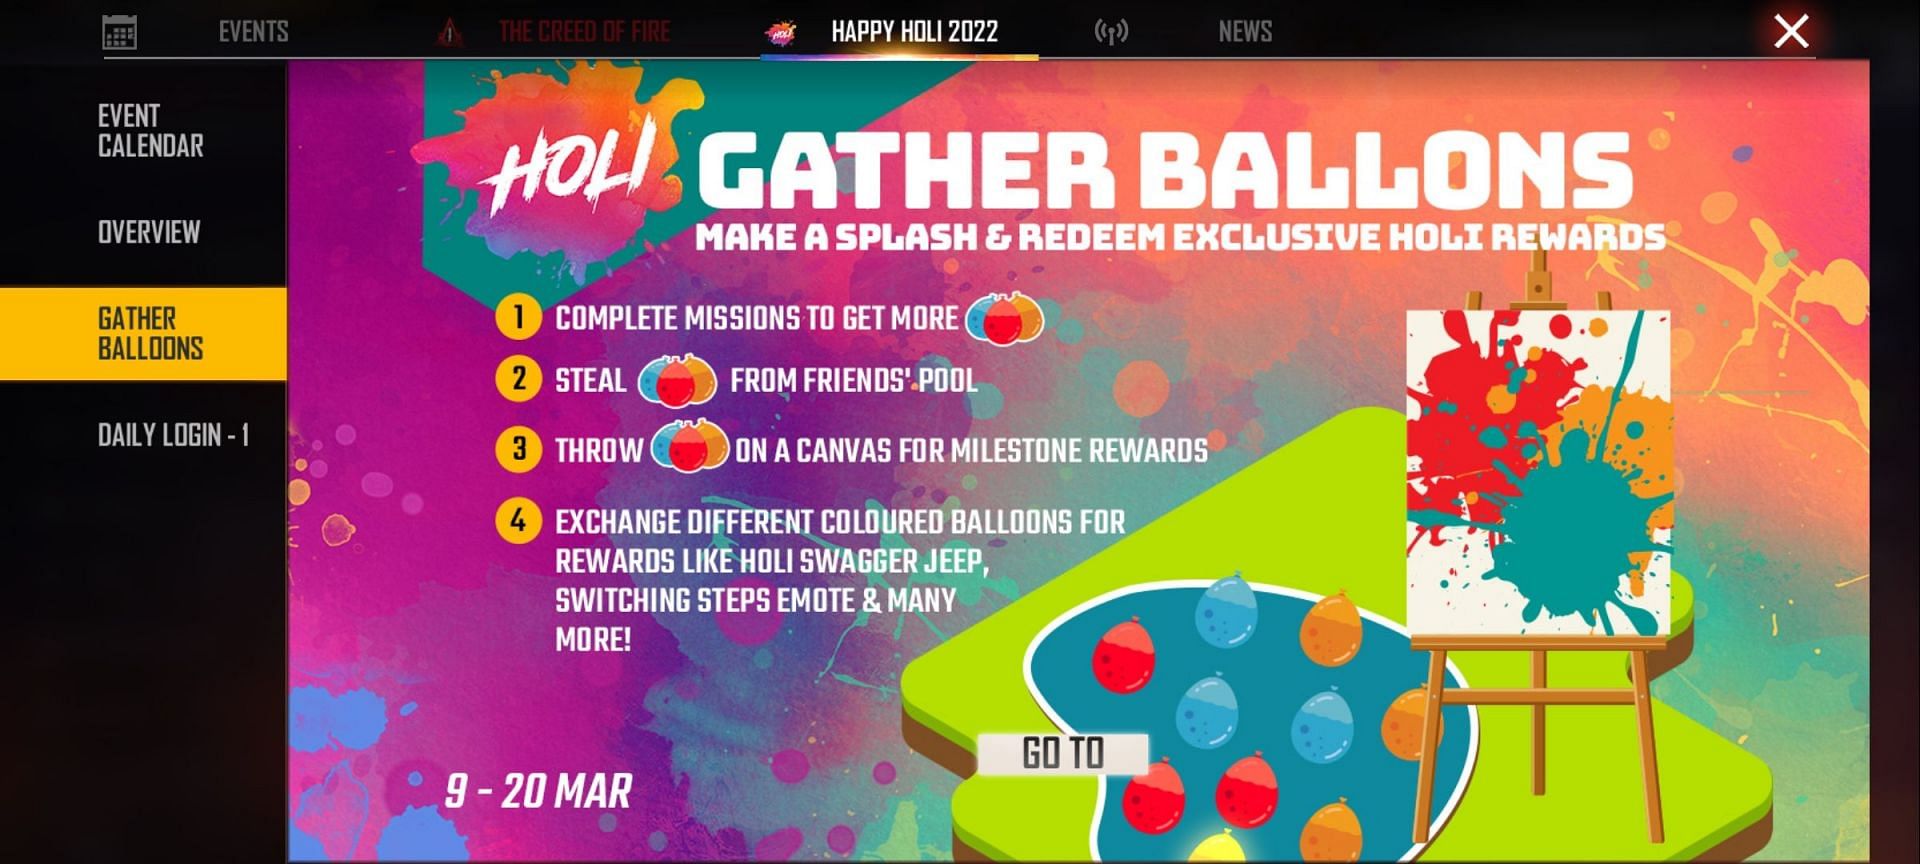 Switching Steps emote is available in Gather Balloons event (Image via Garena)